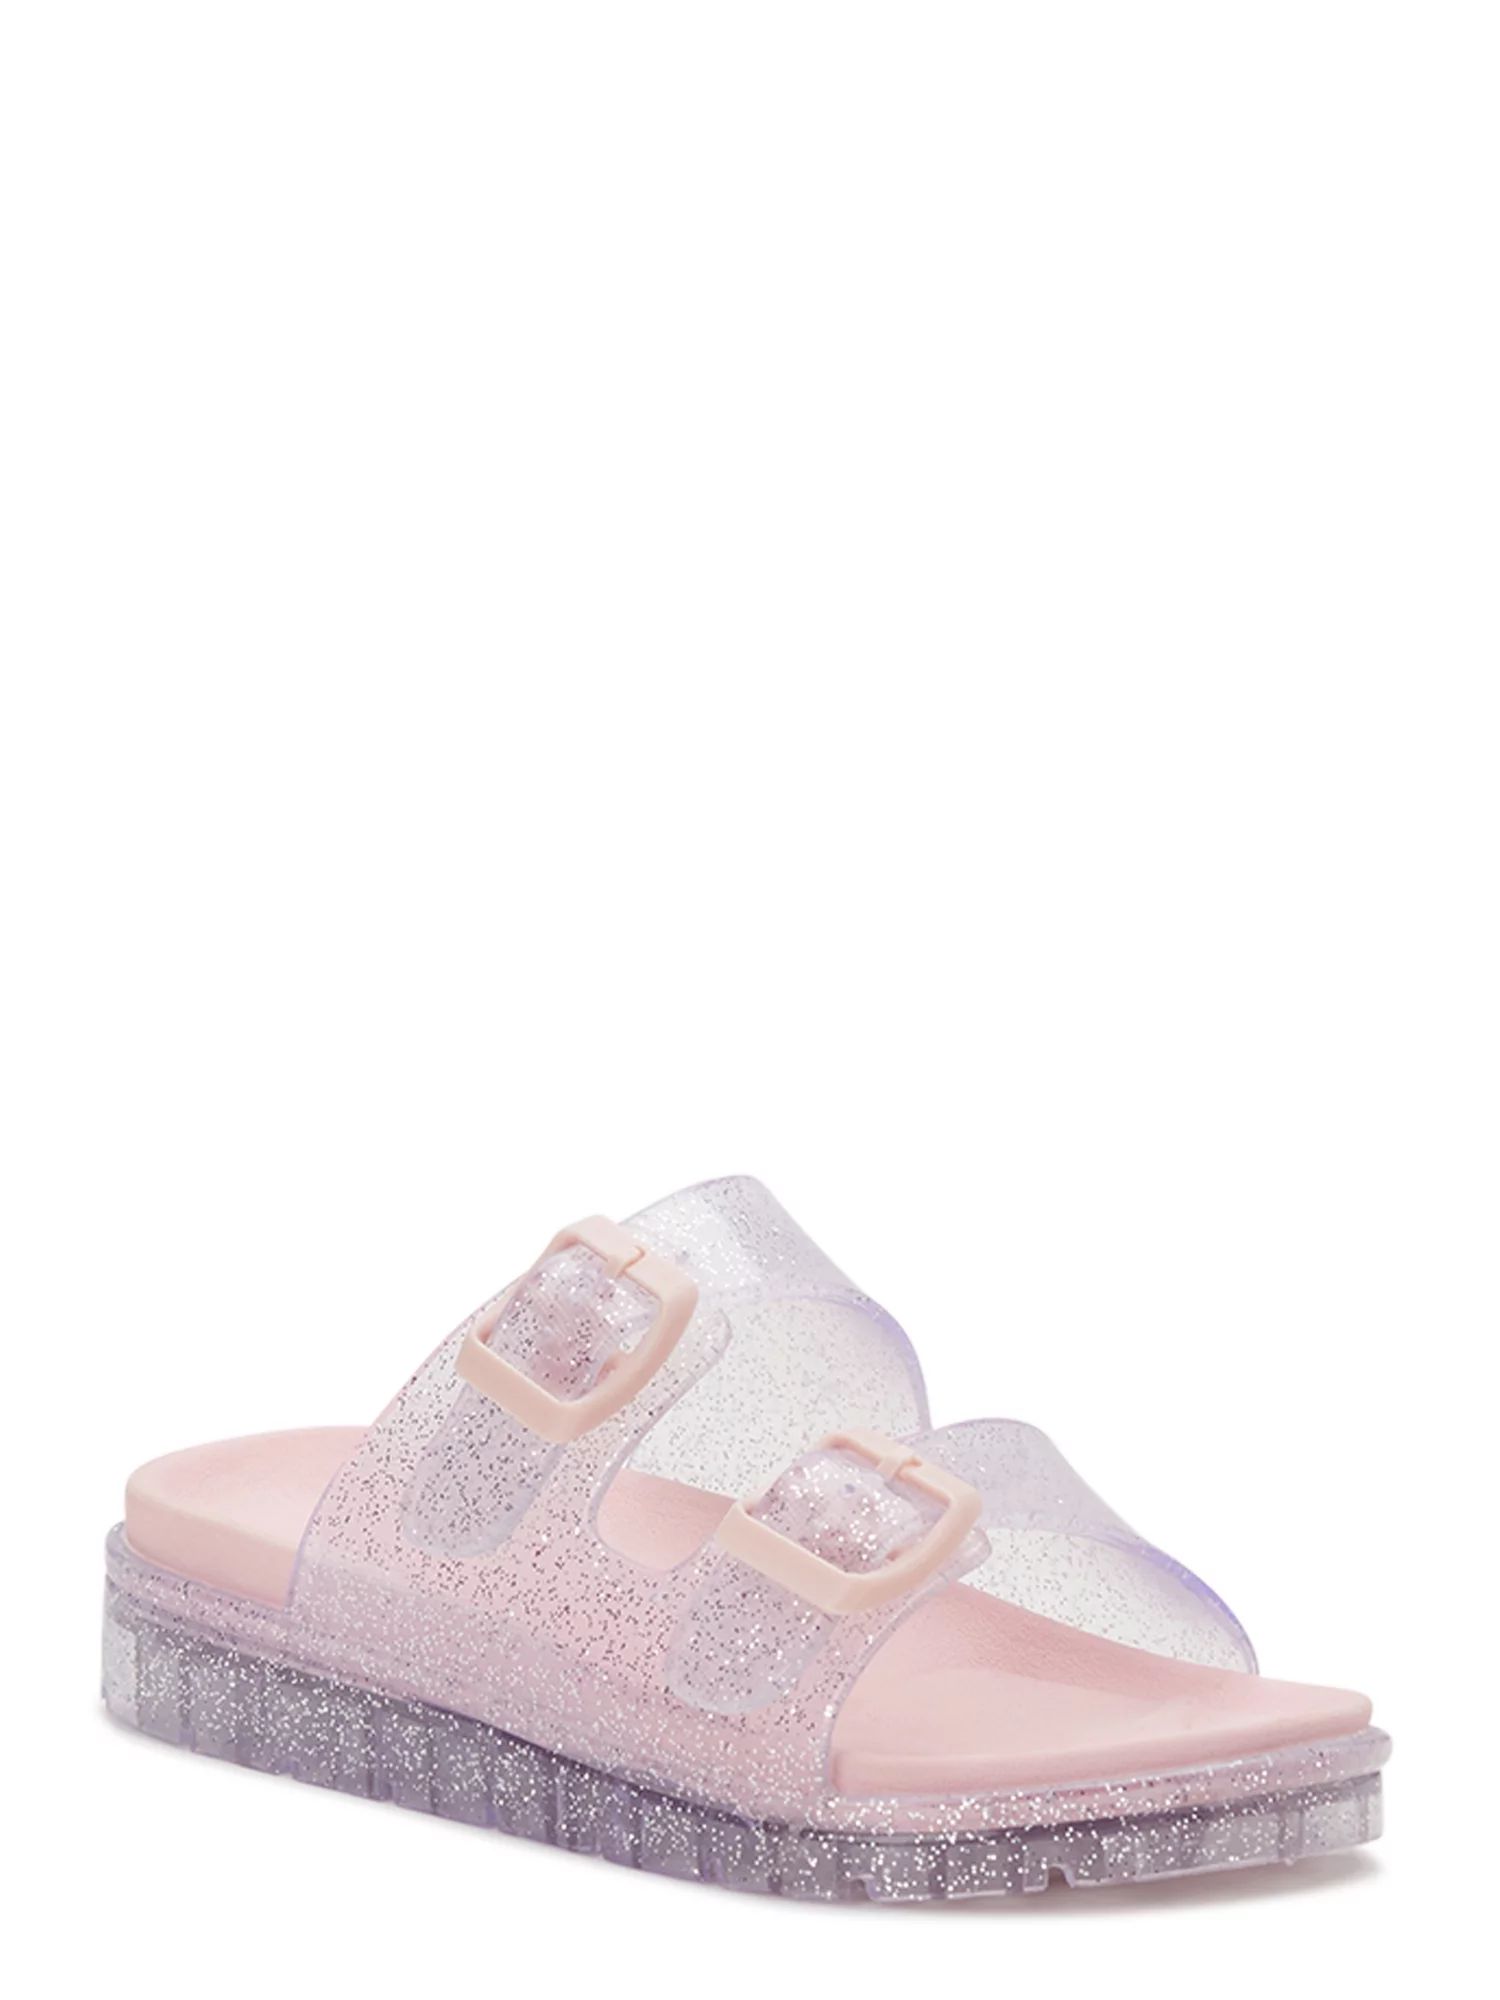 Wonder Nation Little and Big Girls Jelly Two Buckle Sandals, Sizes 13-5 | Walmart (US)